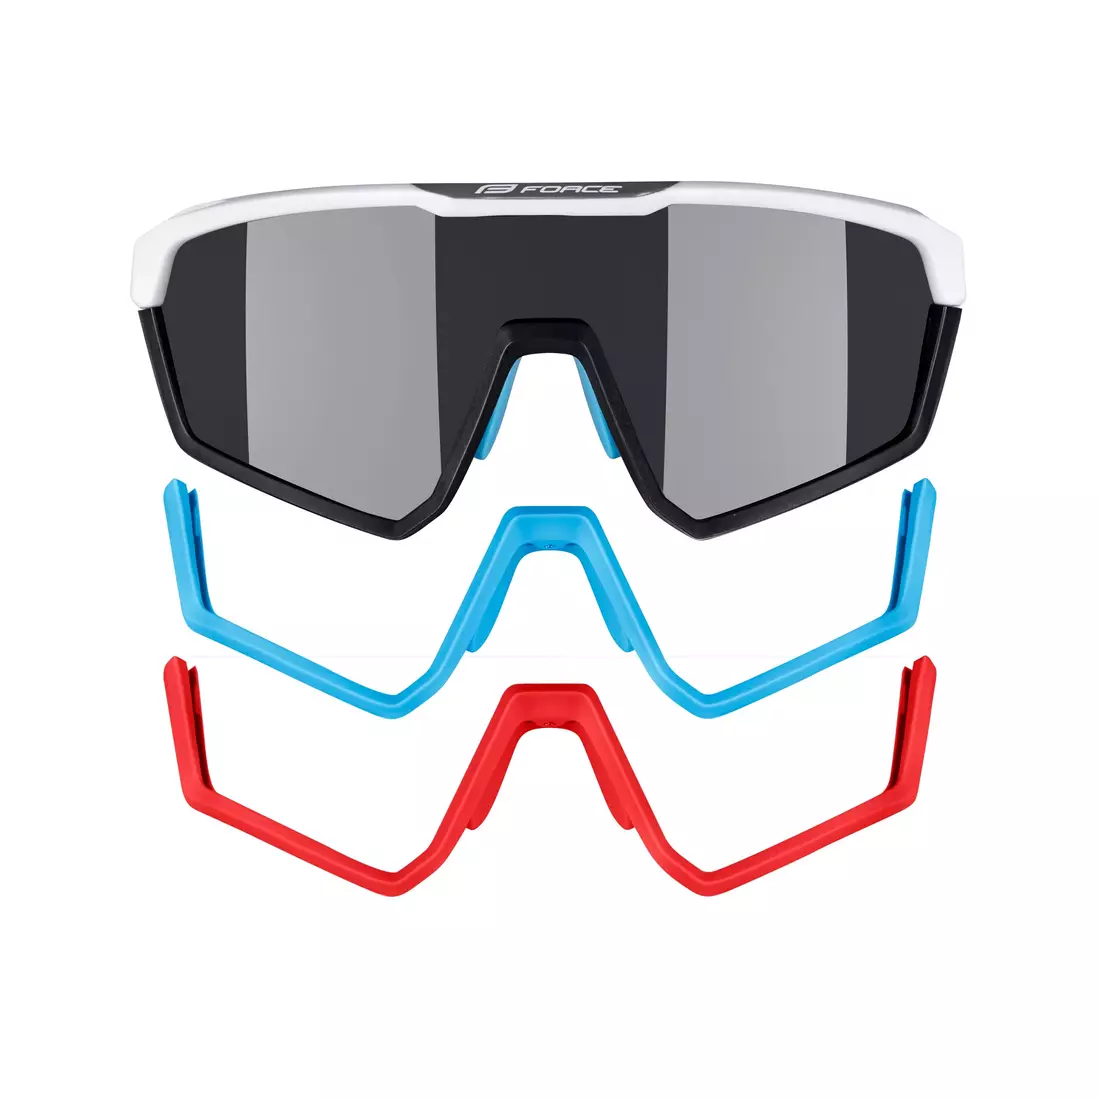 FORCE cycling / sports glasses APEX, white and gray, 910891